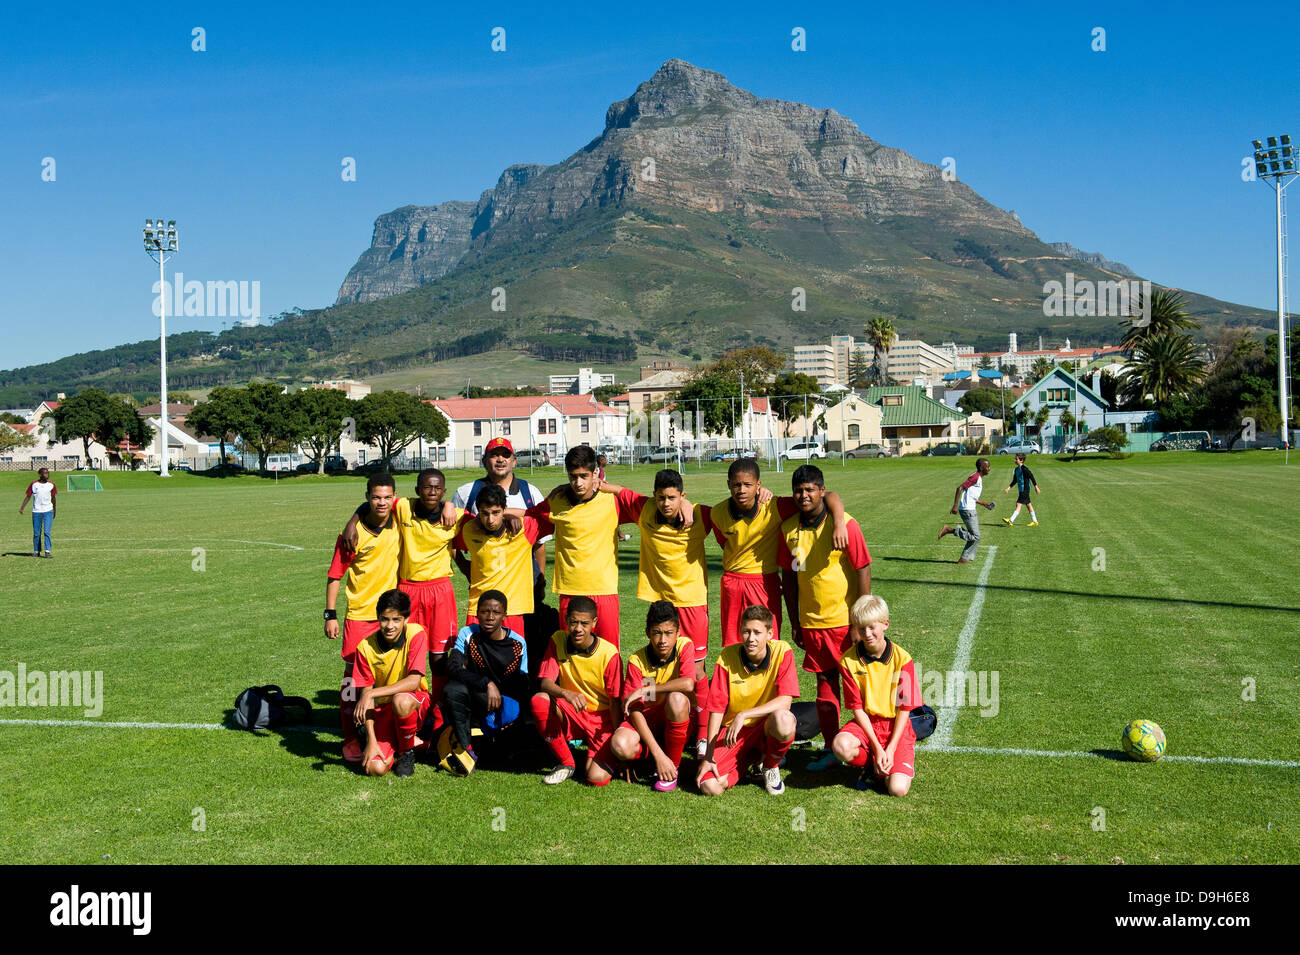 Rygersdal Football Club U15 junior team before a match, Cape Town, South Africa Stock Photo